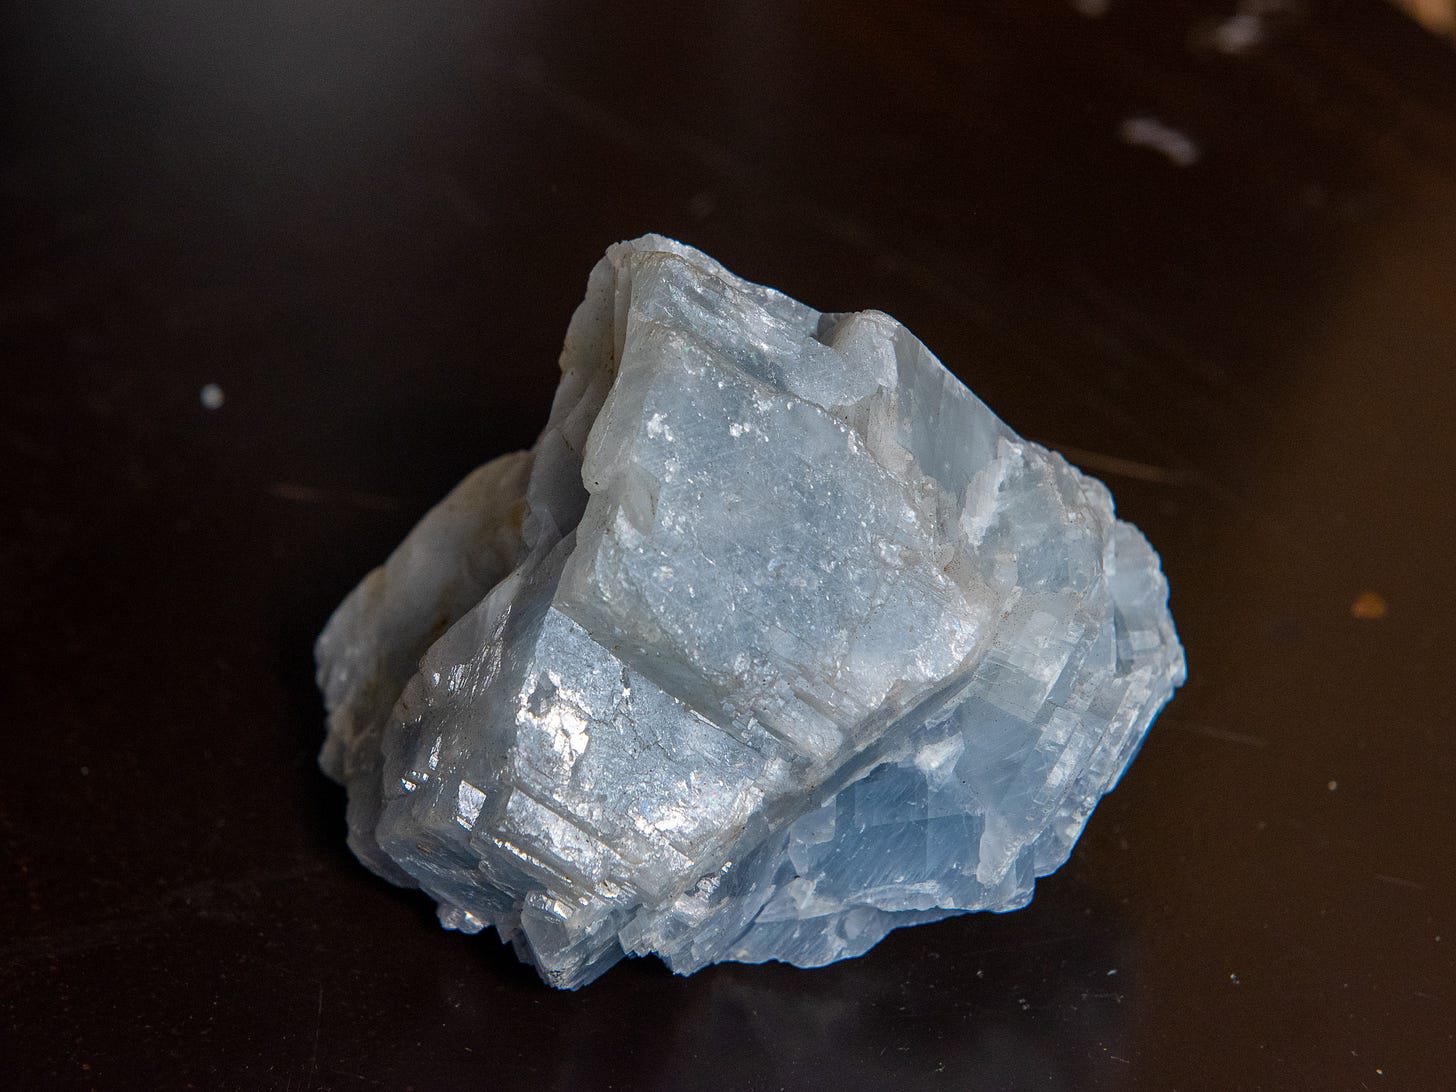 A jagged blue crystal about 4 inches wide on a dark metal surface